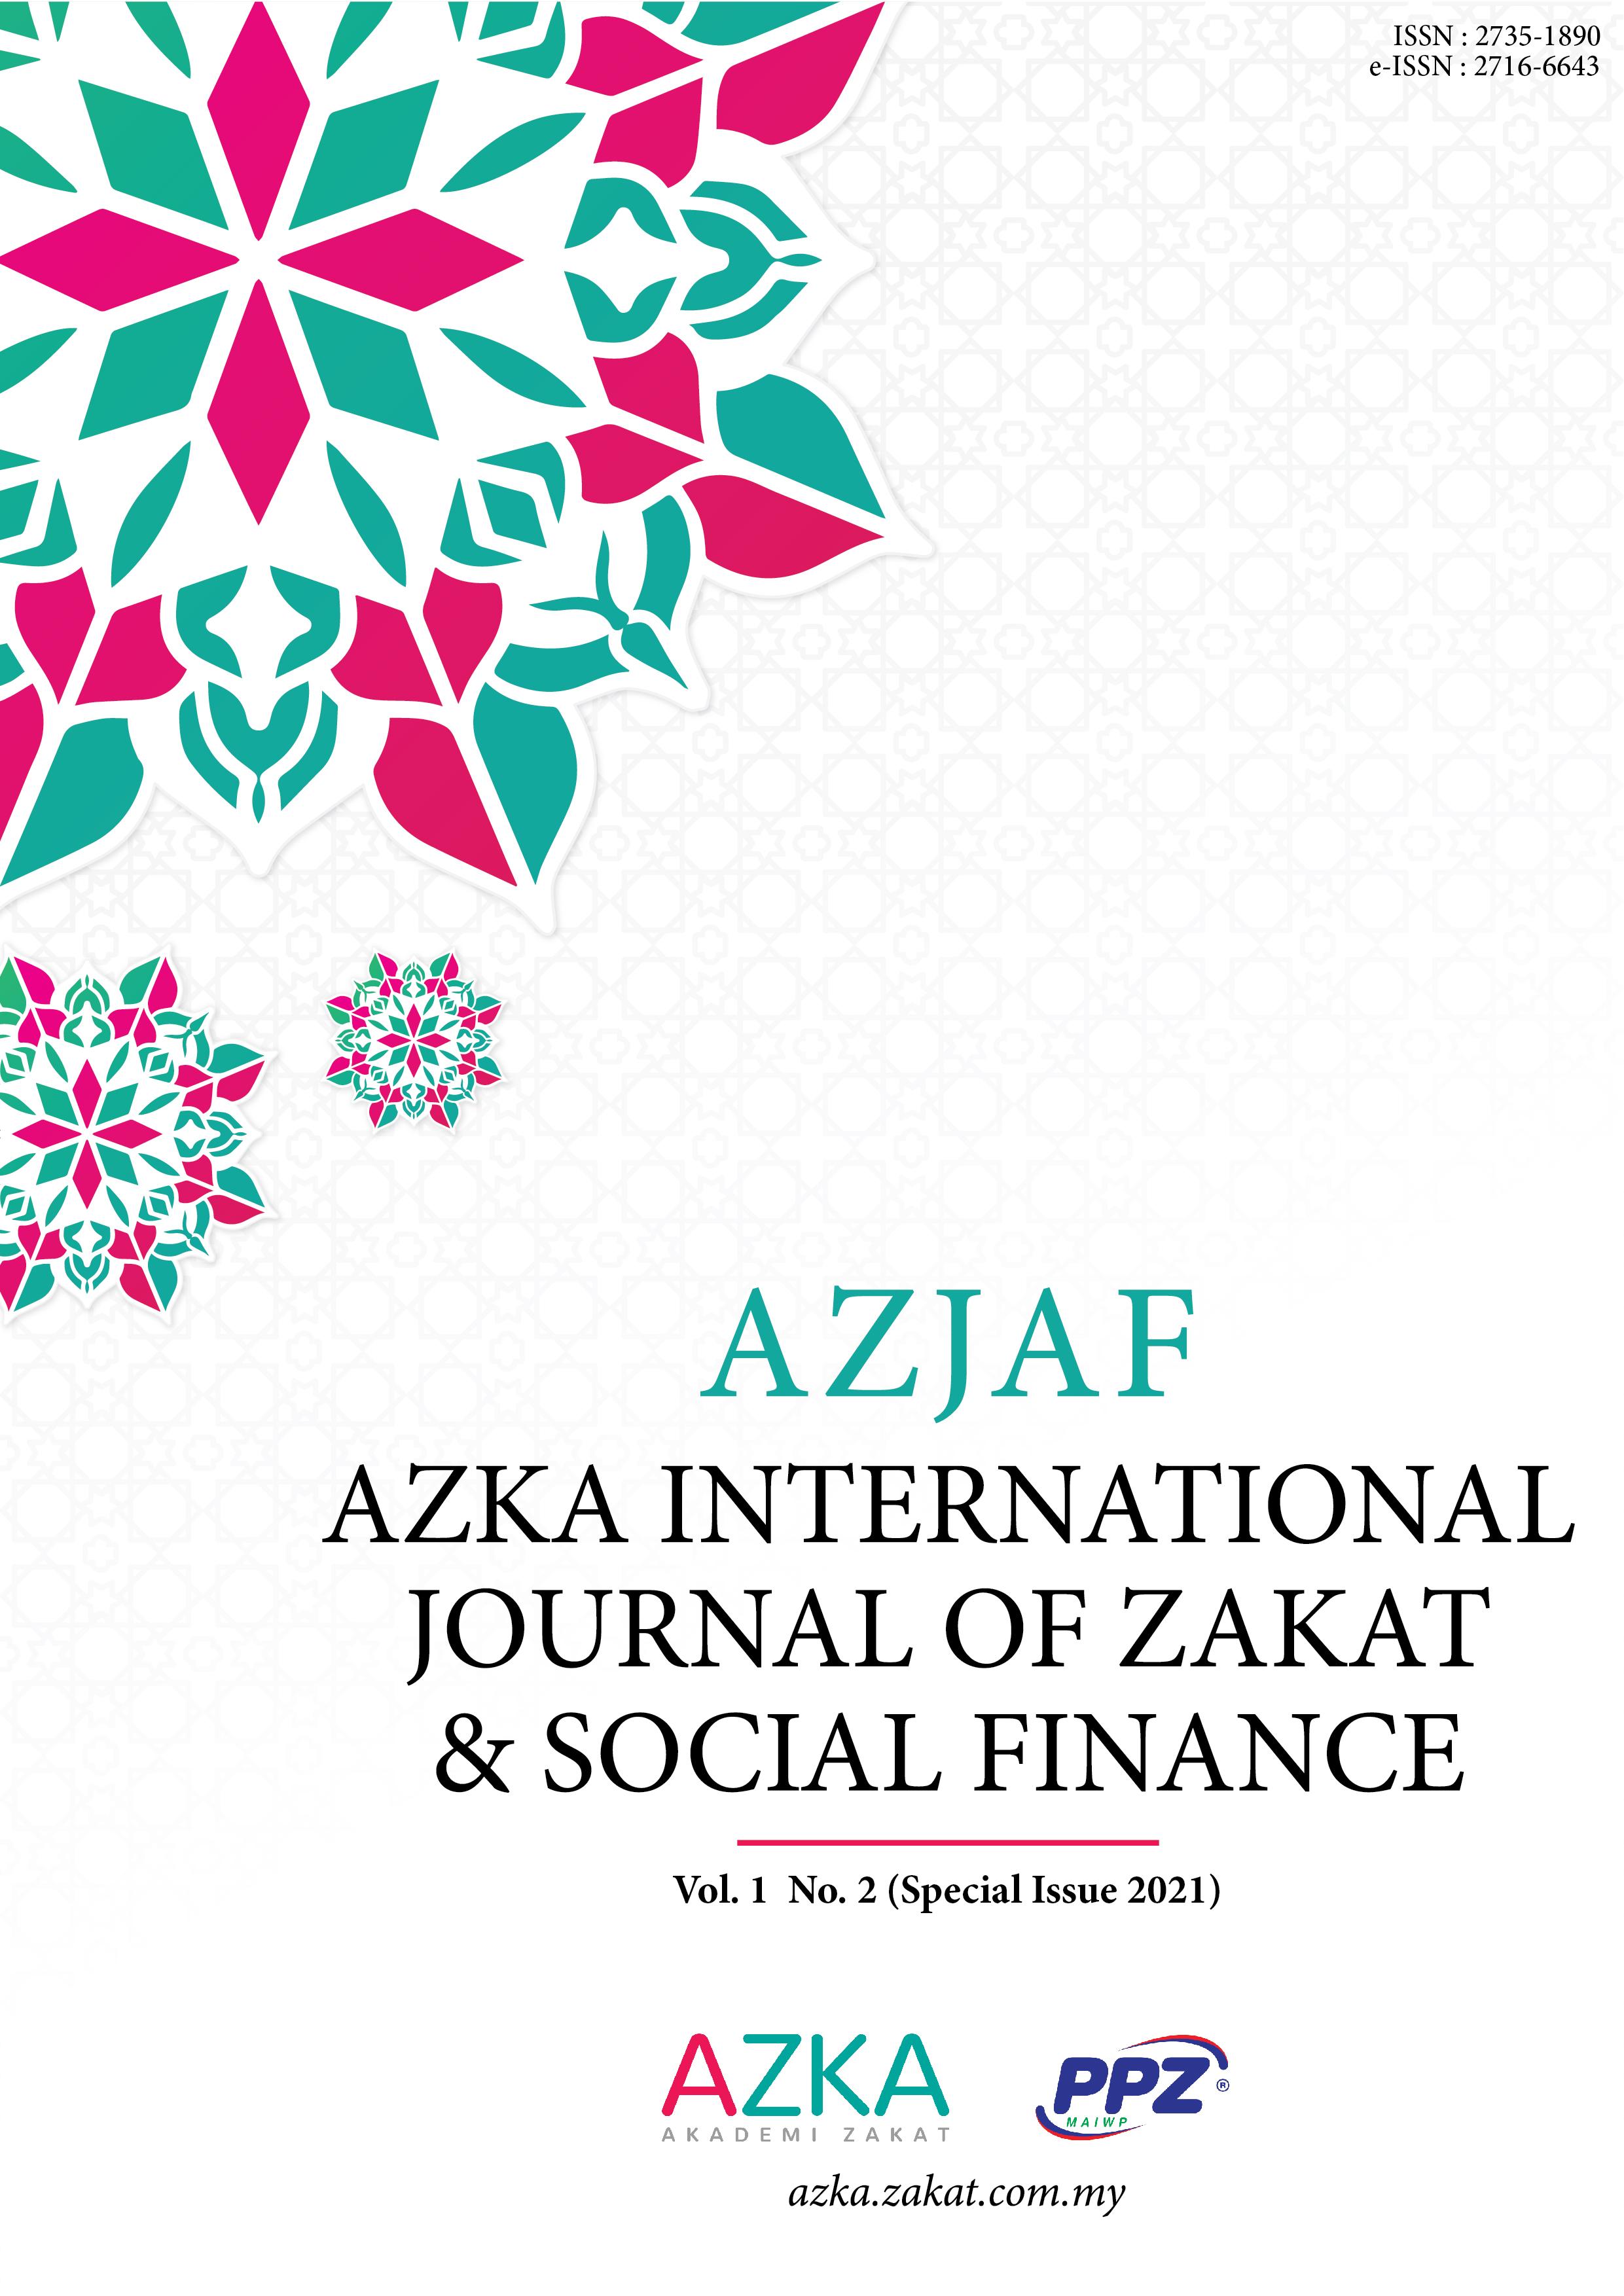 					View AZJAF Vol. 1 No. 2 (Special Issue 2021)
				